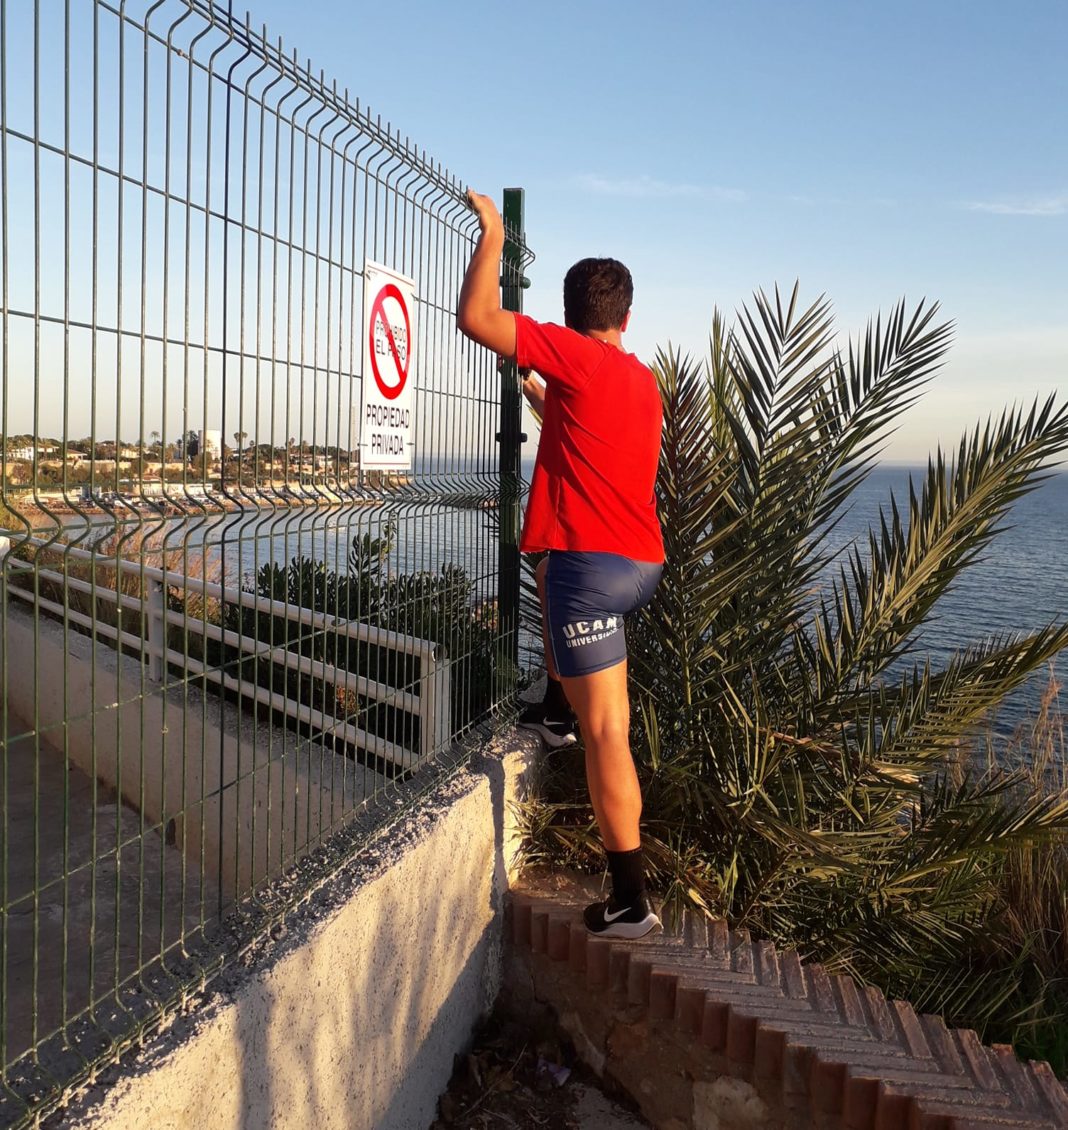 A resident puts his life at risk by climbing around the fence